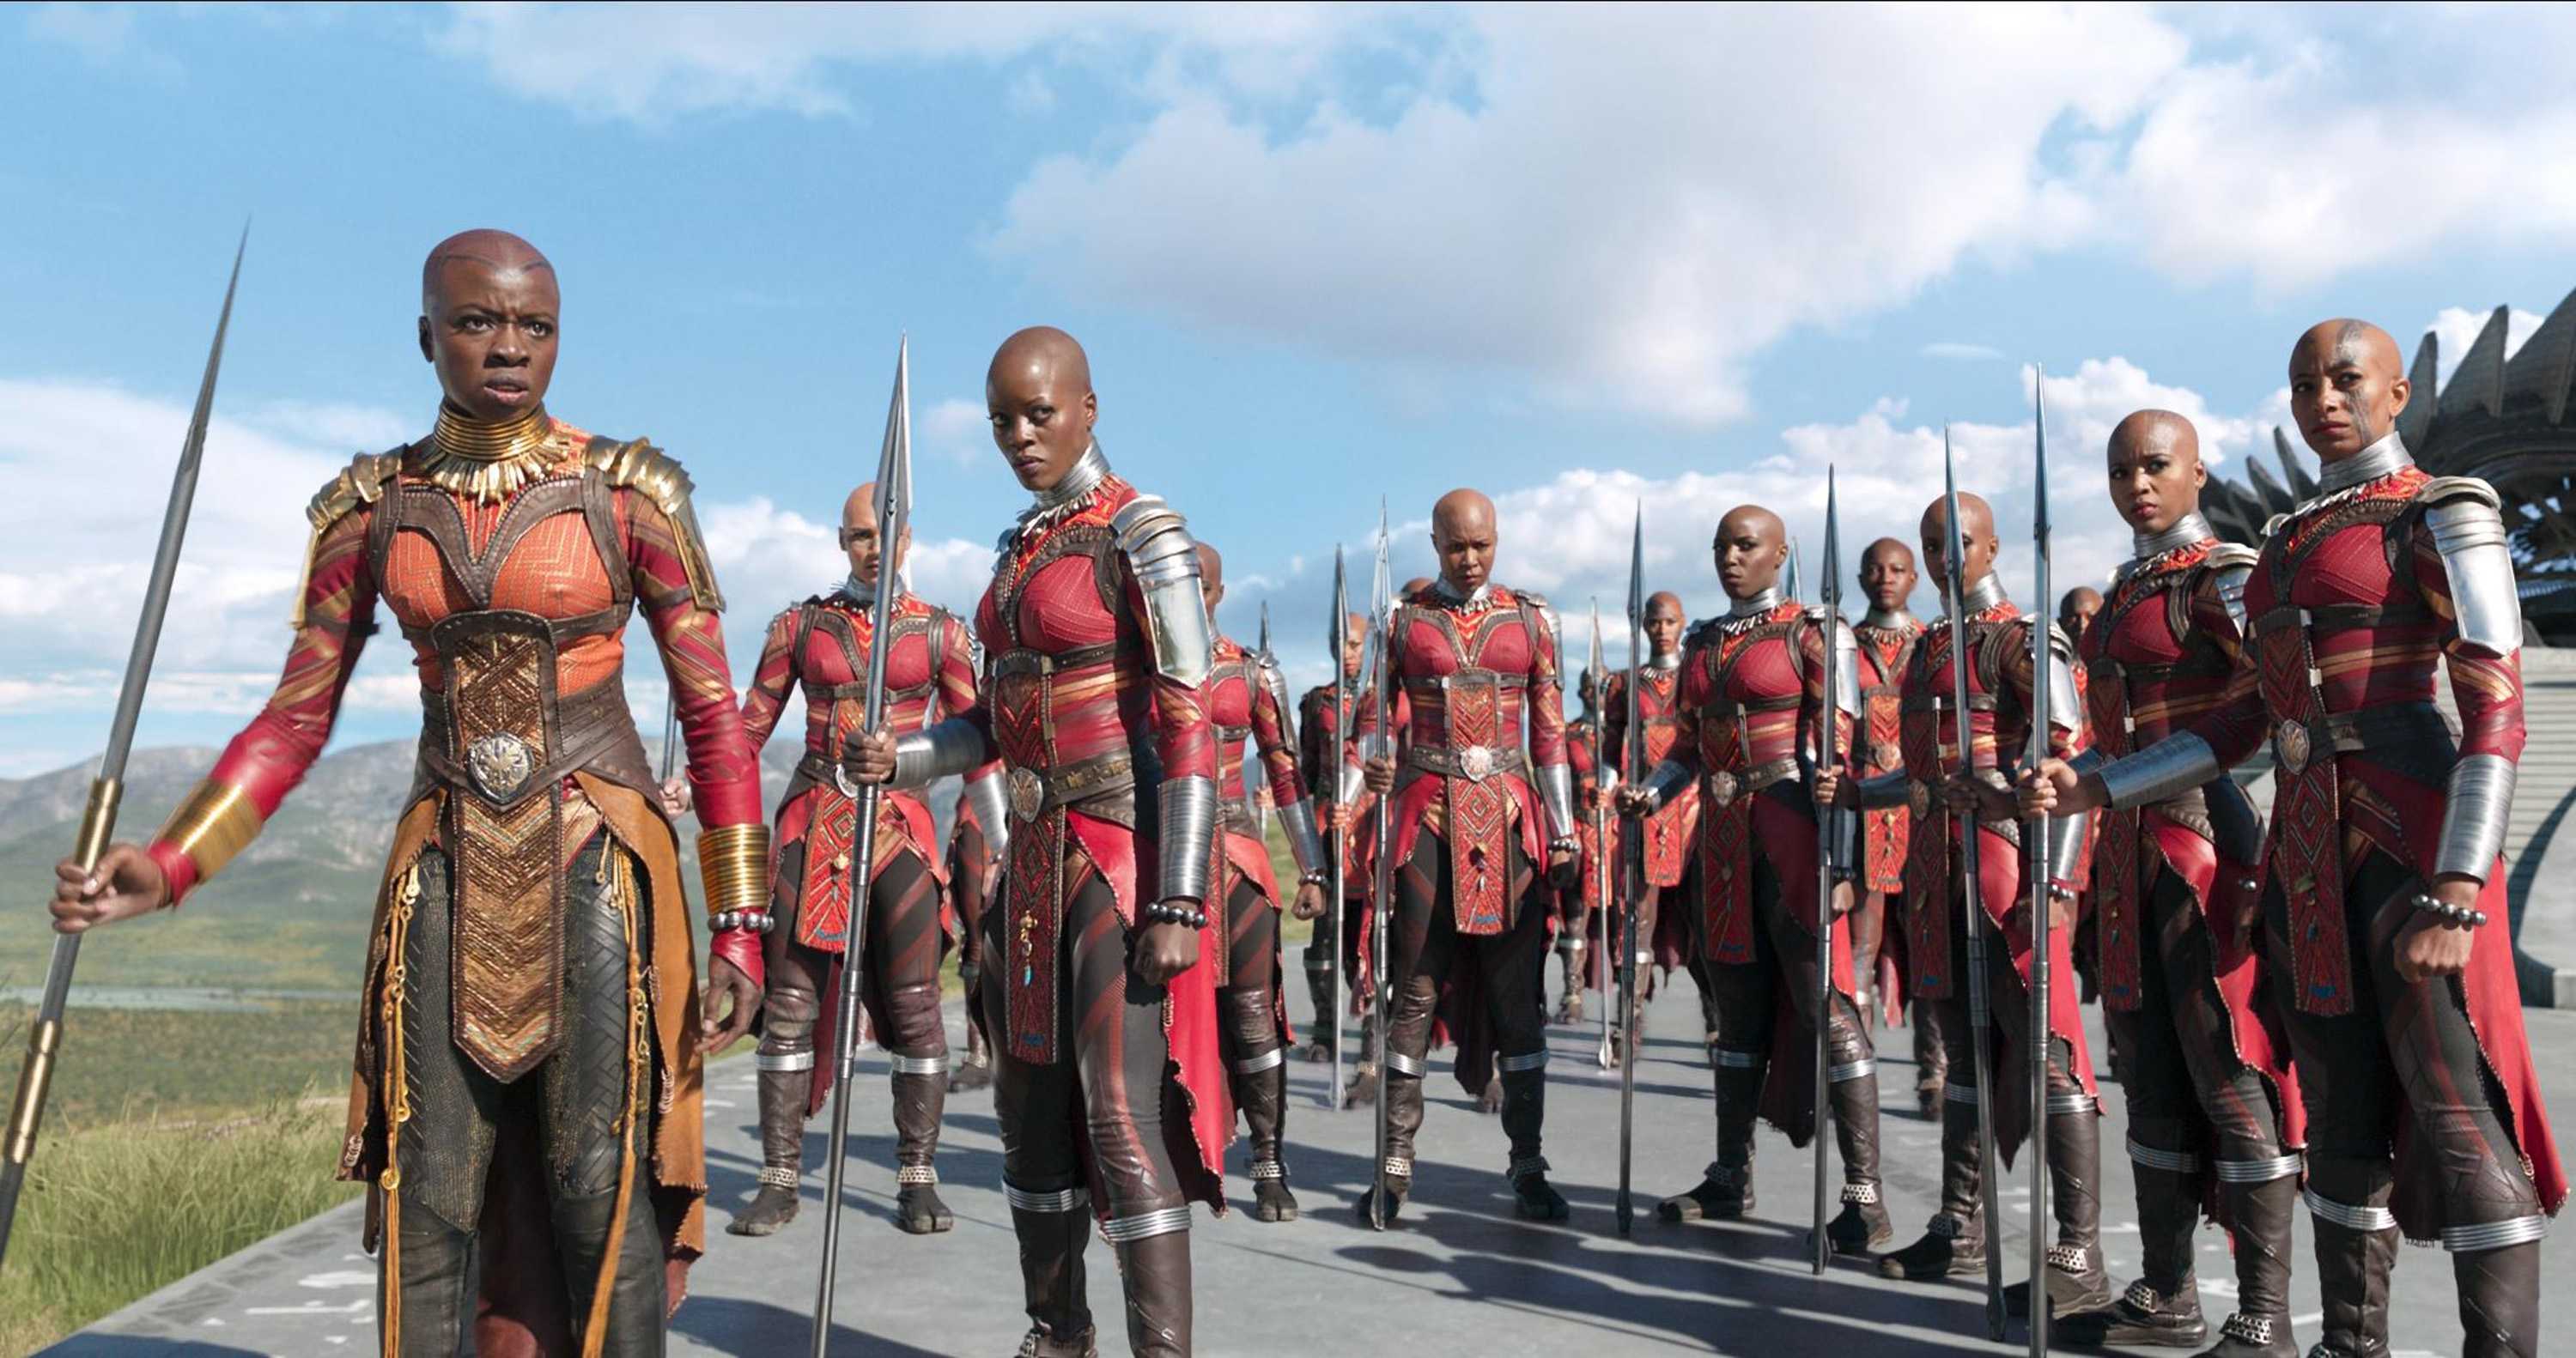 Danai Gurira and Florence Kasumba as leaders of the Dora Malaje ready to fight. The army is dressed in battle gear, looking away at their opponents.